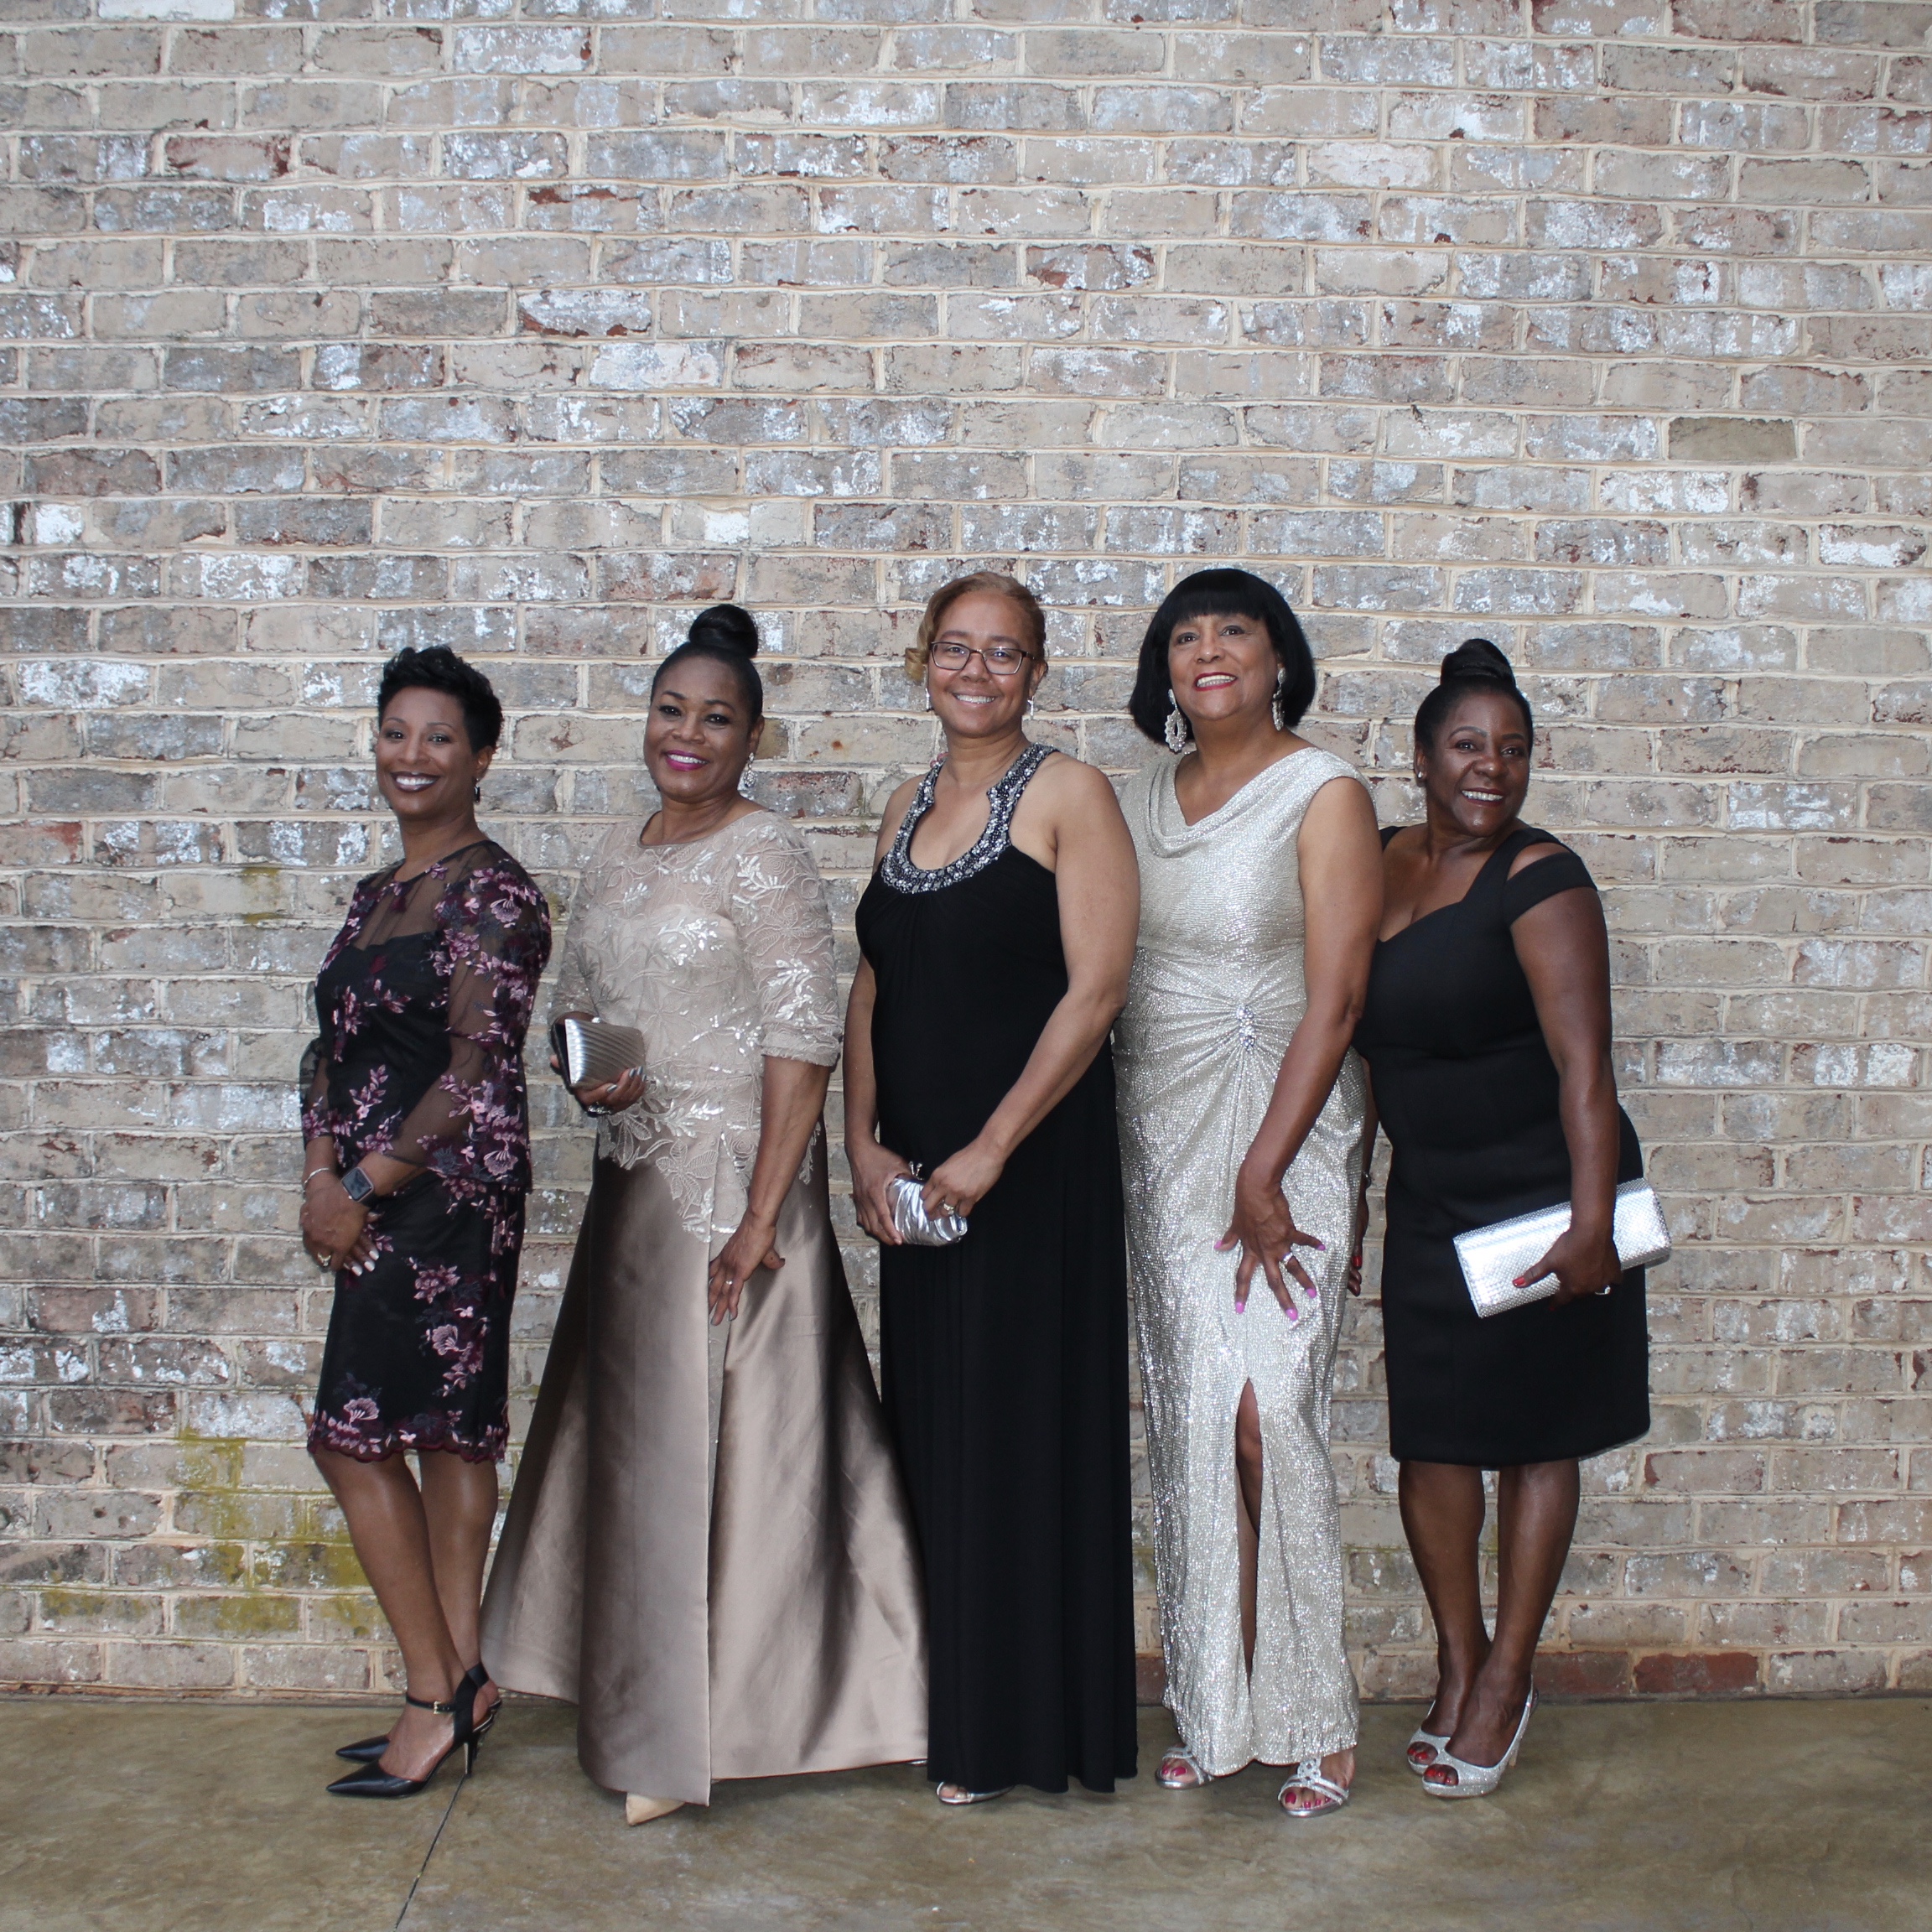 The Lady guests at our annual Club Twenty-One Dinner Dance